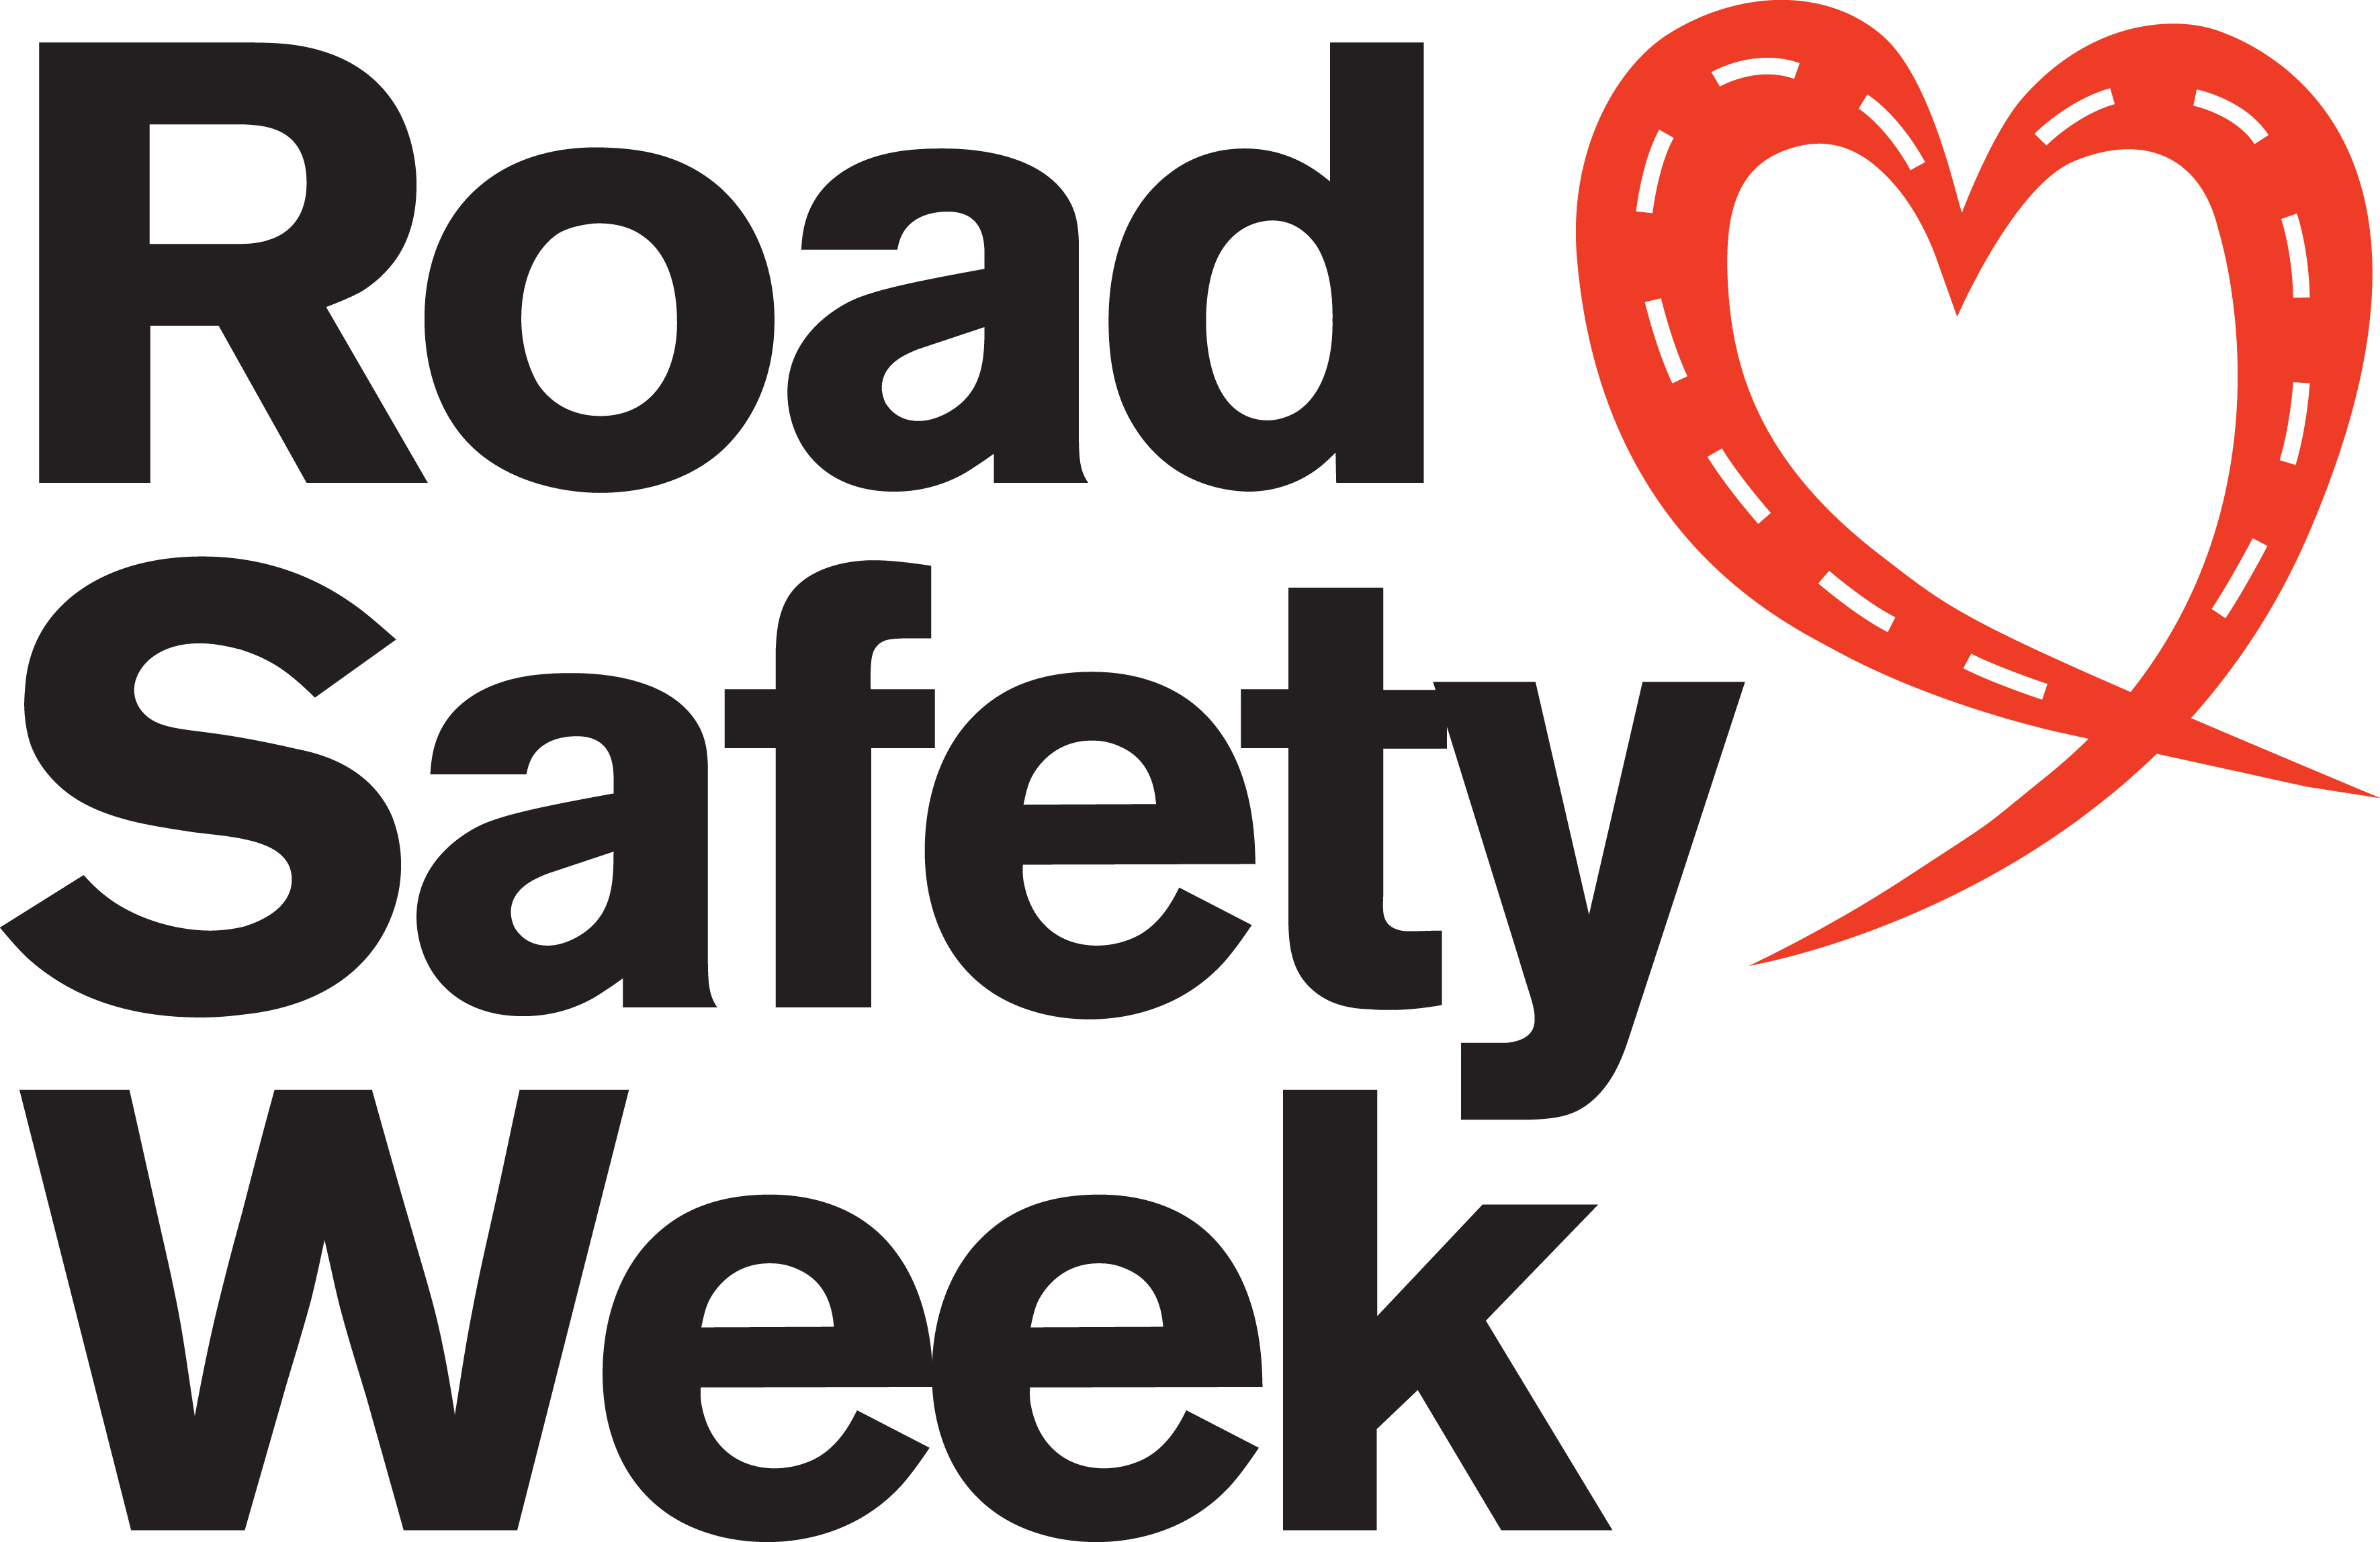 Videographers needed for Road Safety Week!